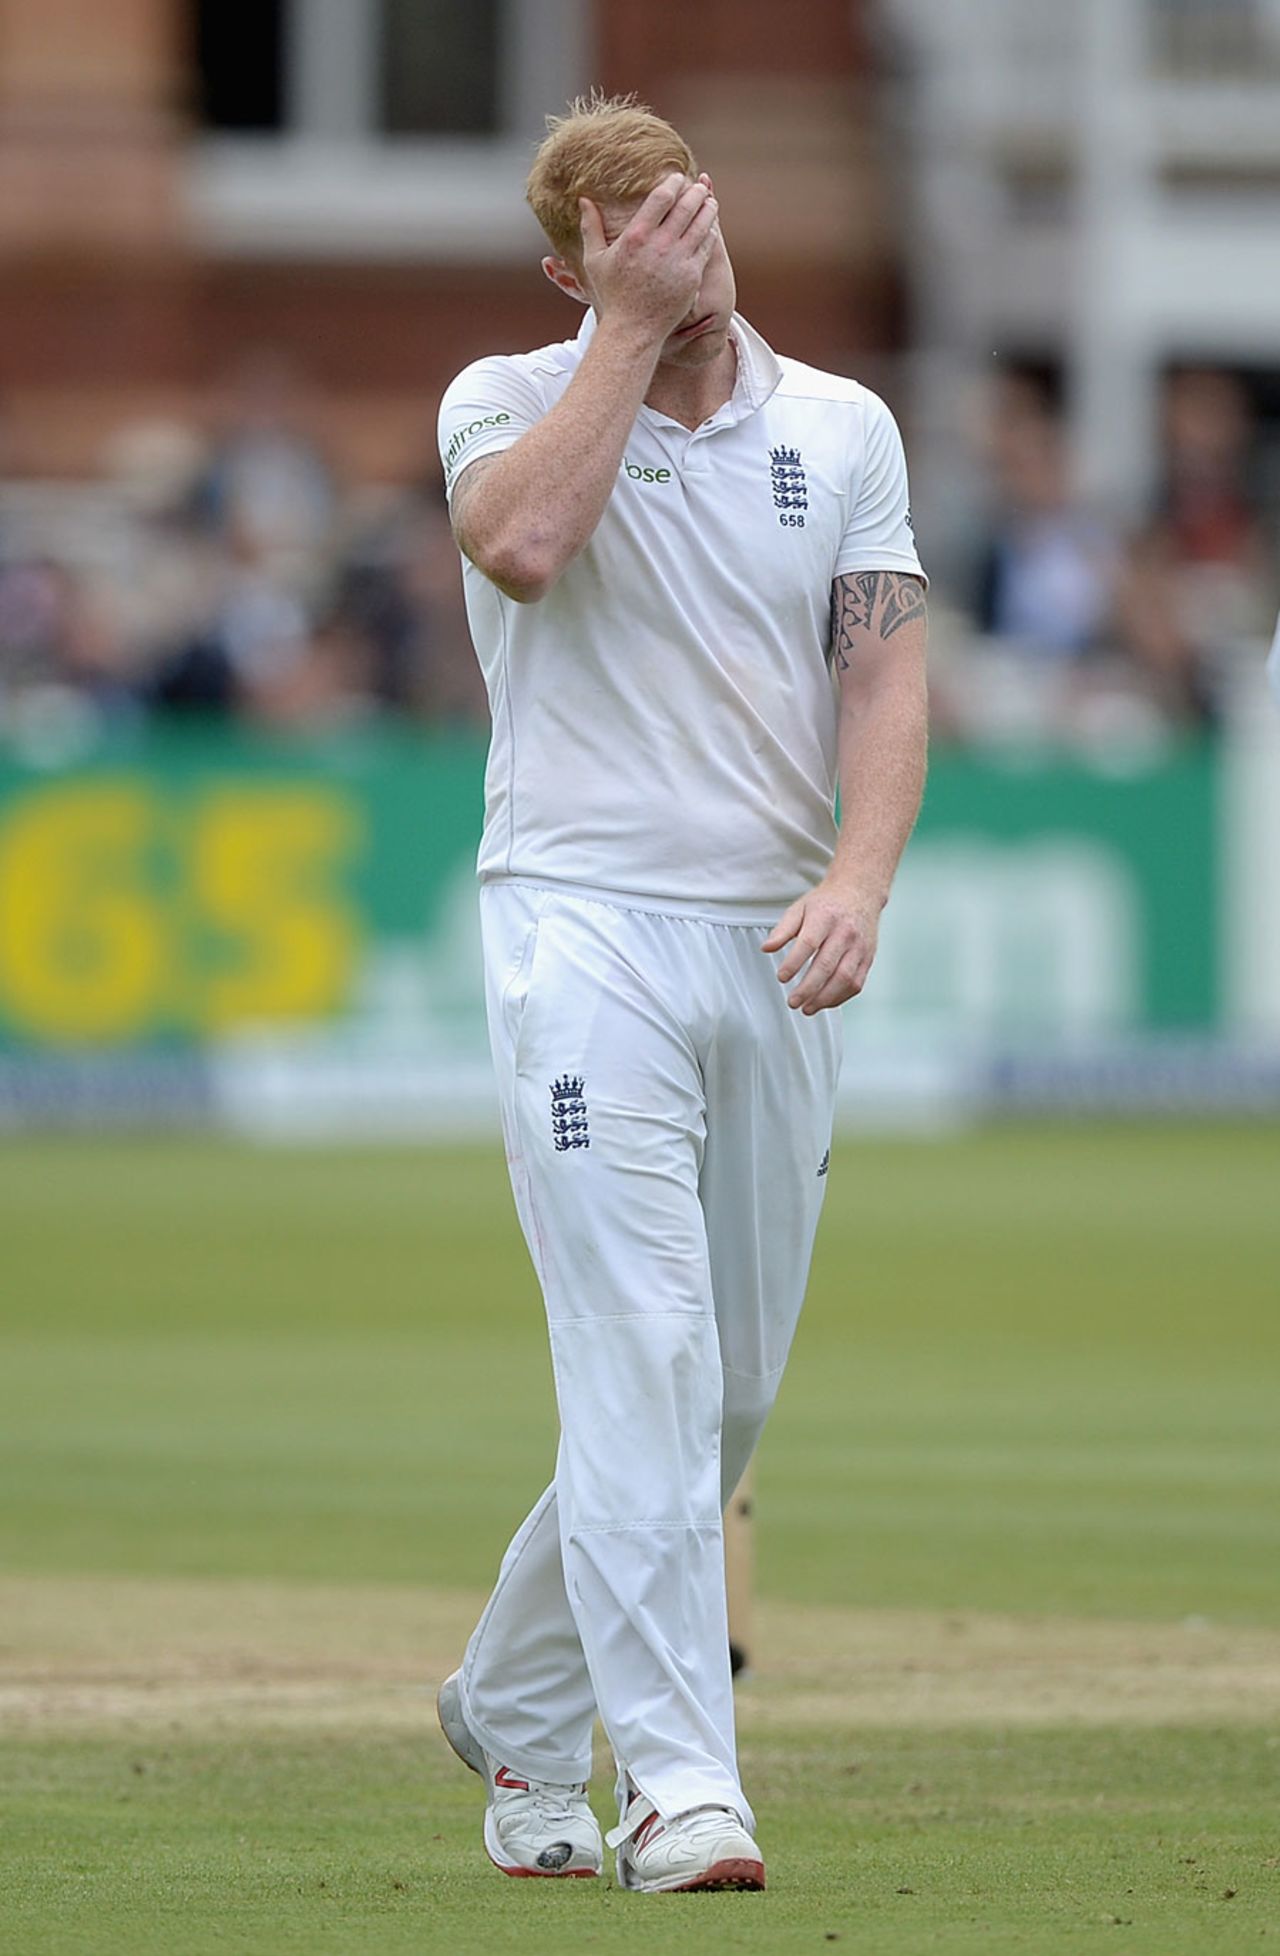 Not again: Ben Stokes had another catch dropped off his bowling, England v New Zealand, 1st Investec Test, Lord's, 3rd day, May 23, 2015